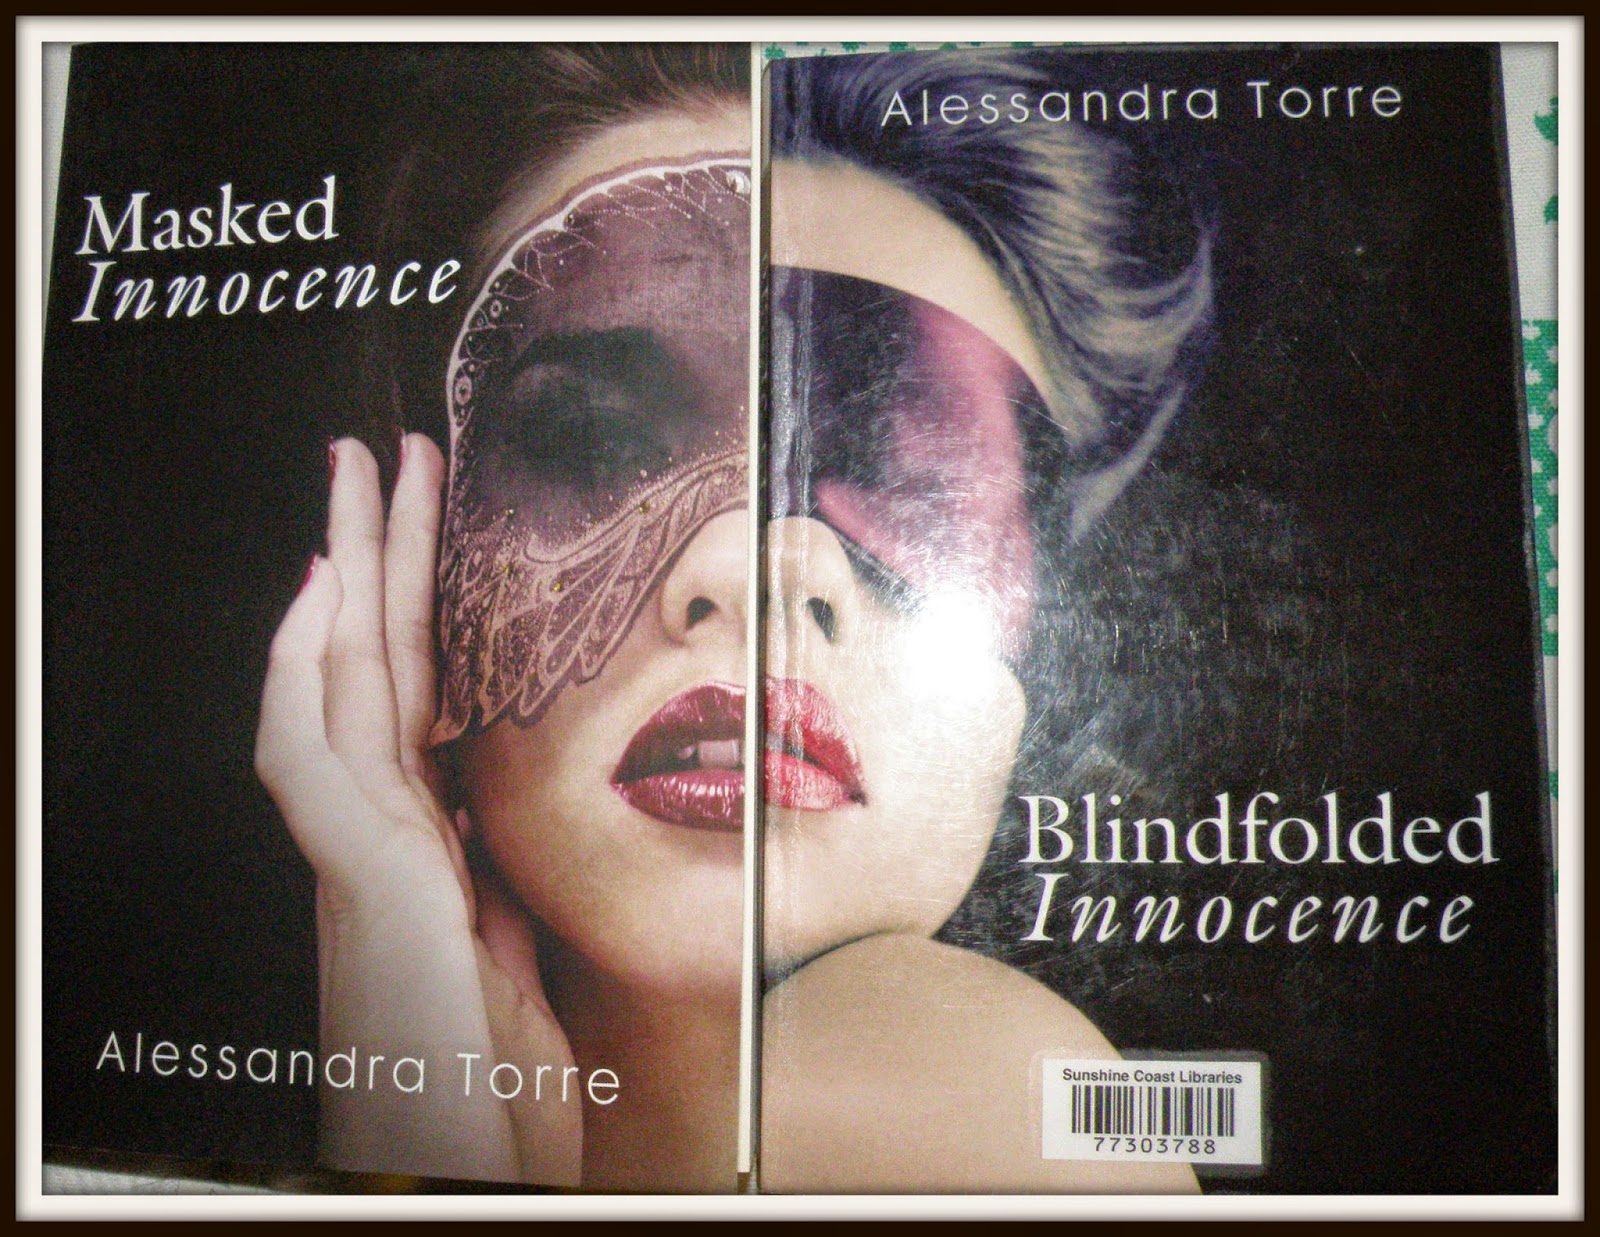 Alexis *Reality Bites*'s review of Blindfolded Innocence